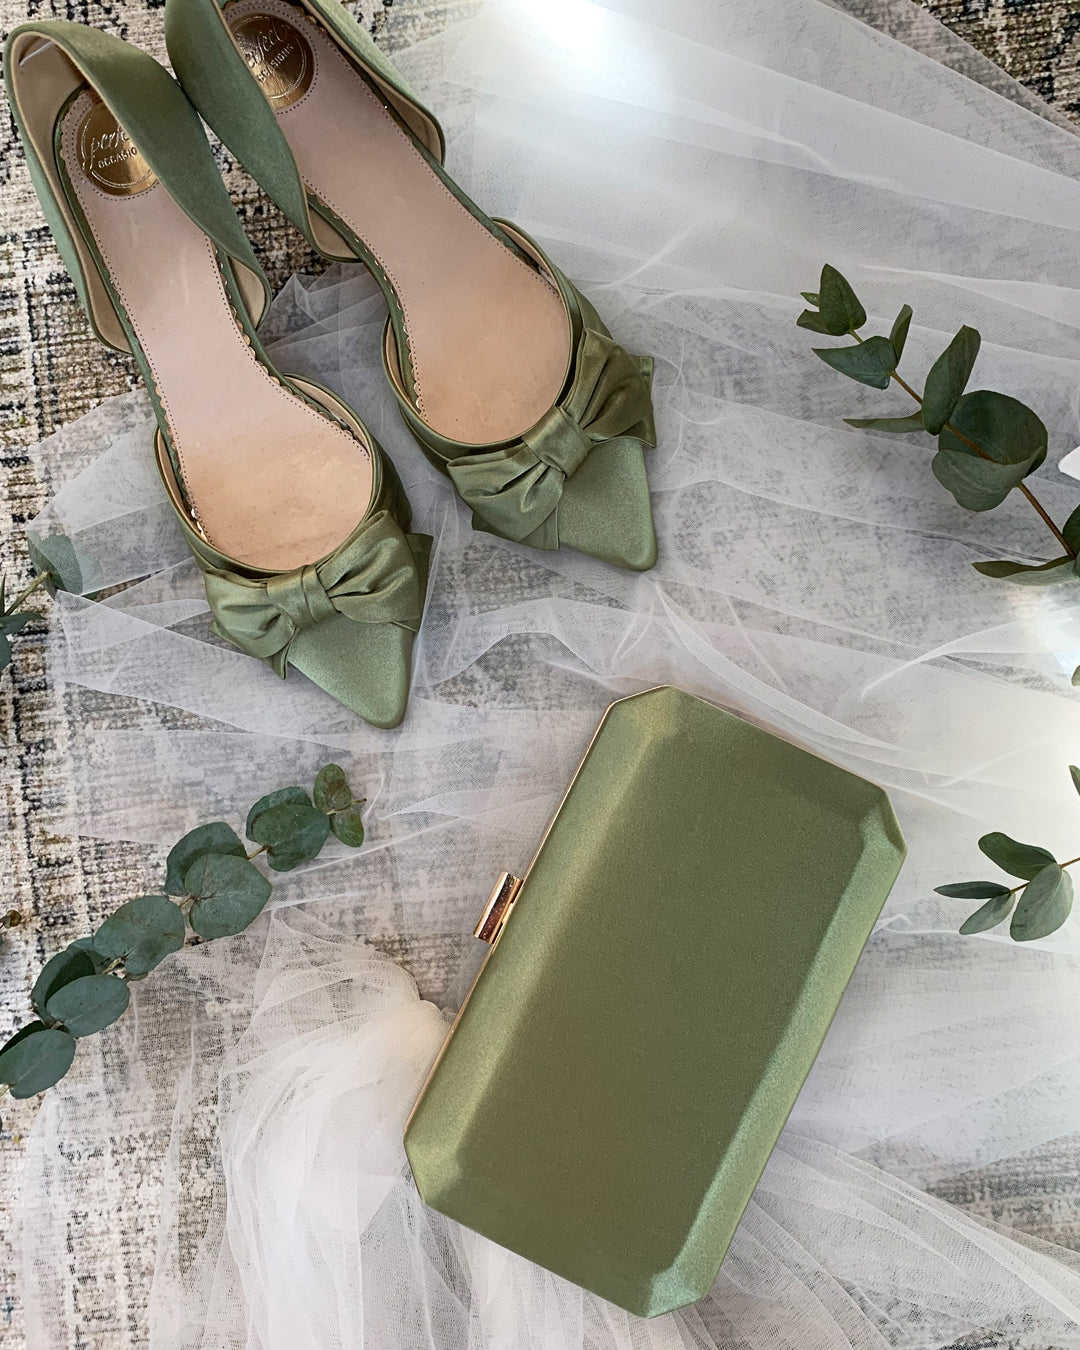 Margo olive green satin bow points